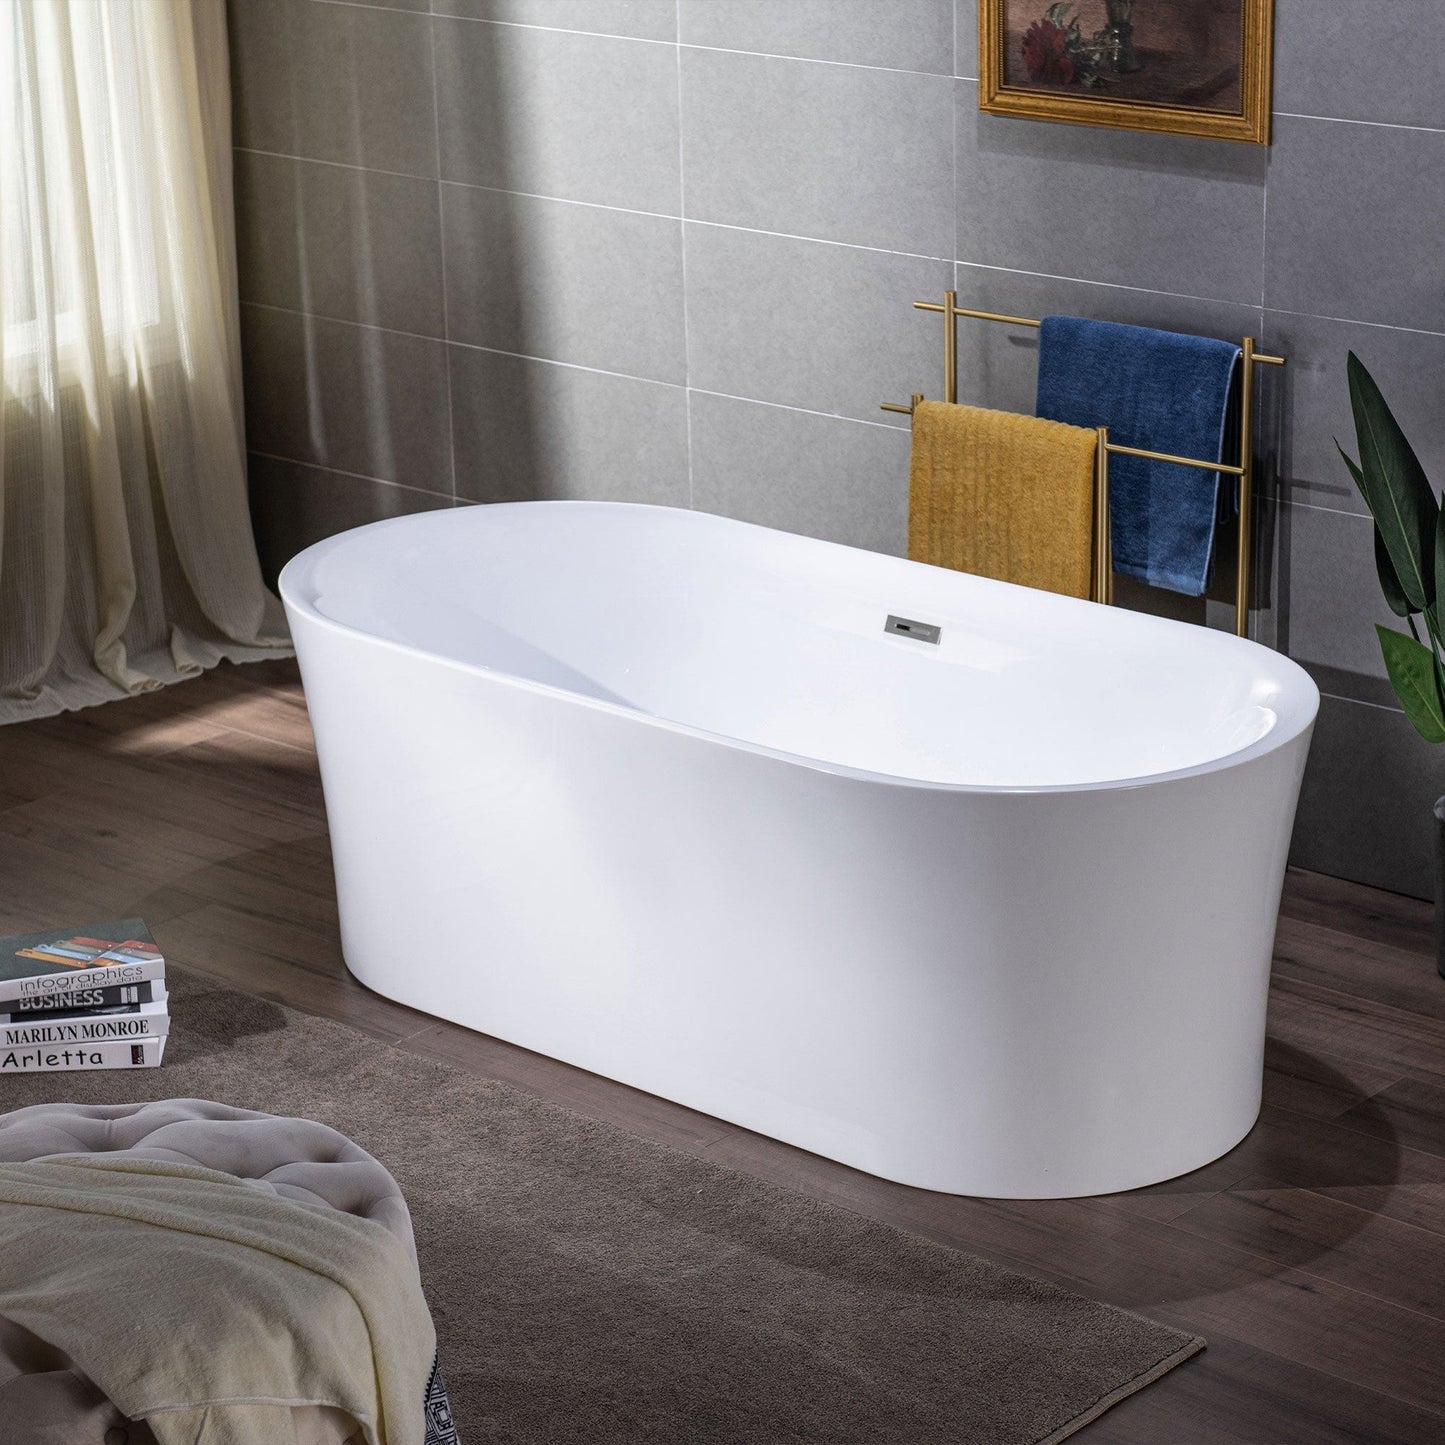 WoodBridge B0057 67" White Acrylic Freestanding Contemporary Soaking Bathtub With Brushed Nickel Overflow and Drain